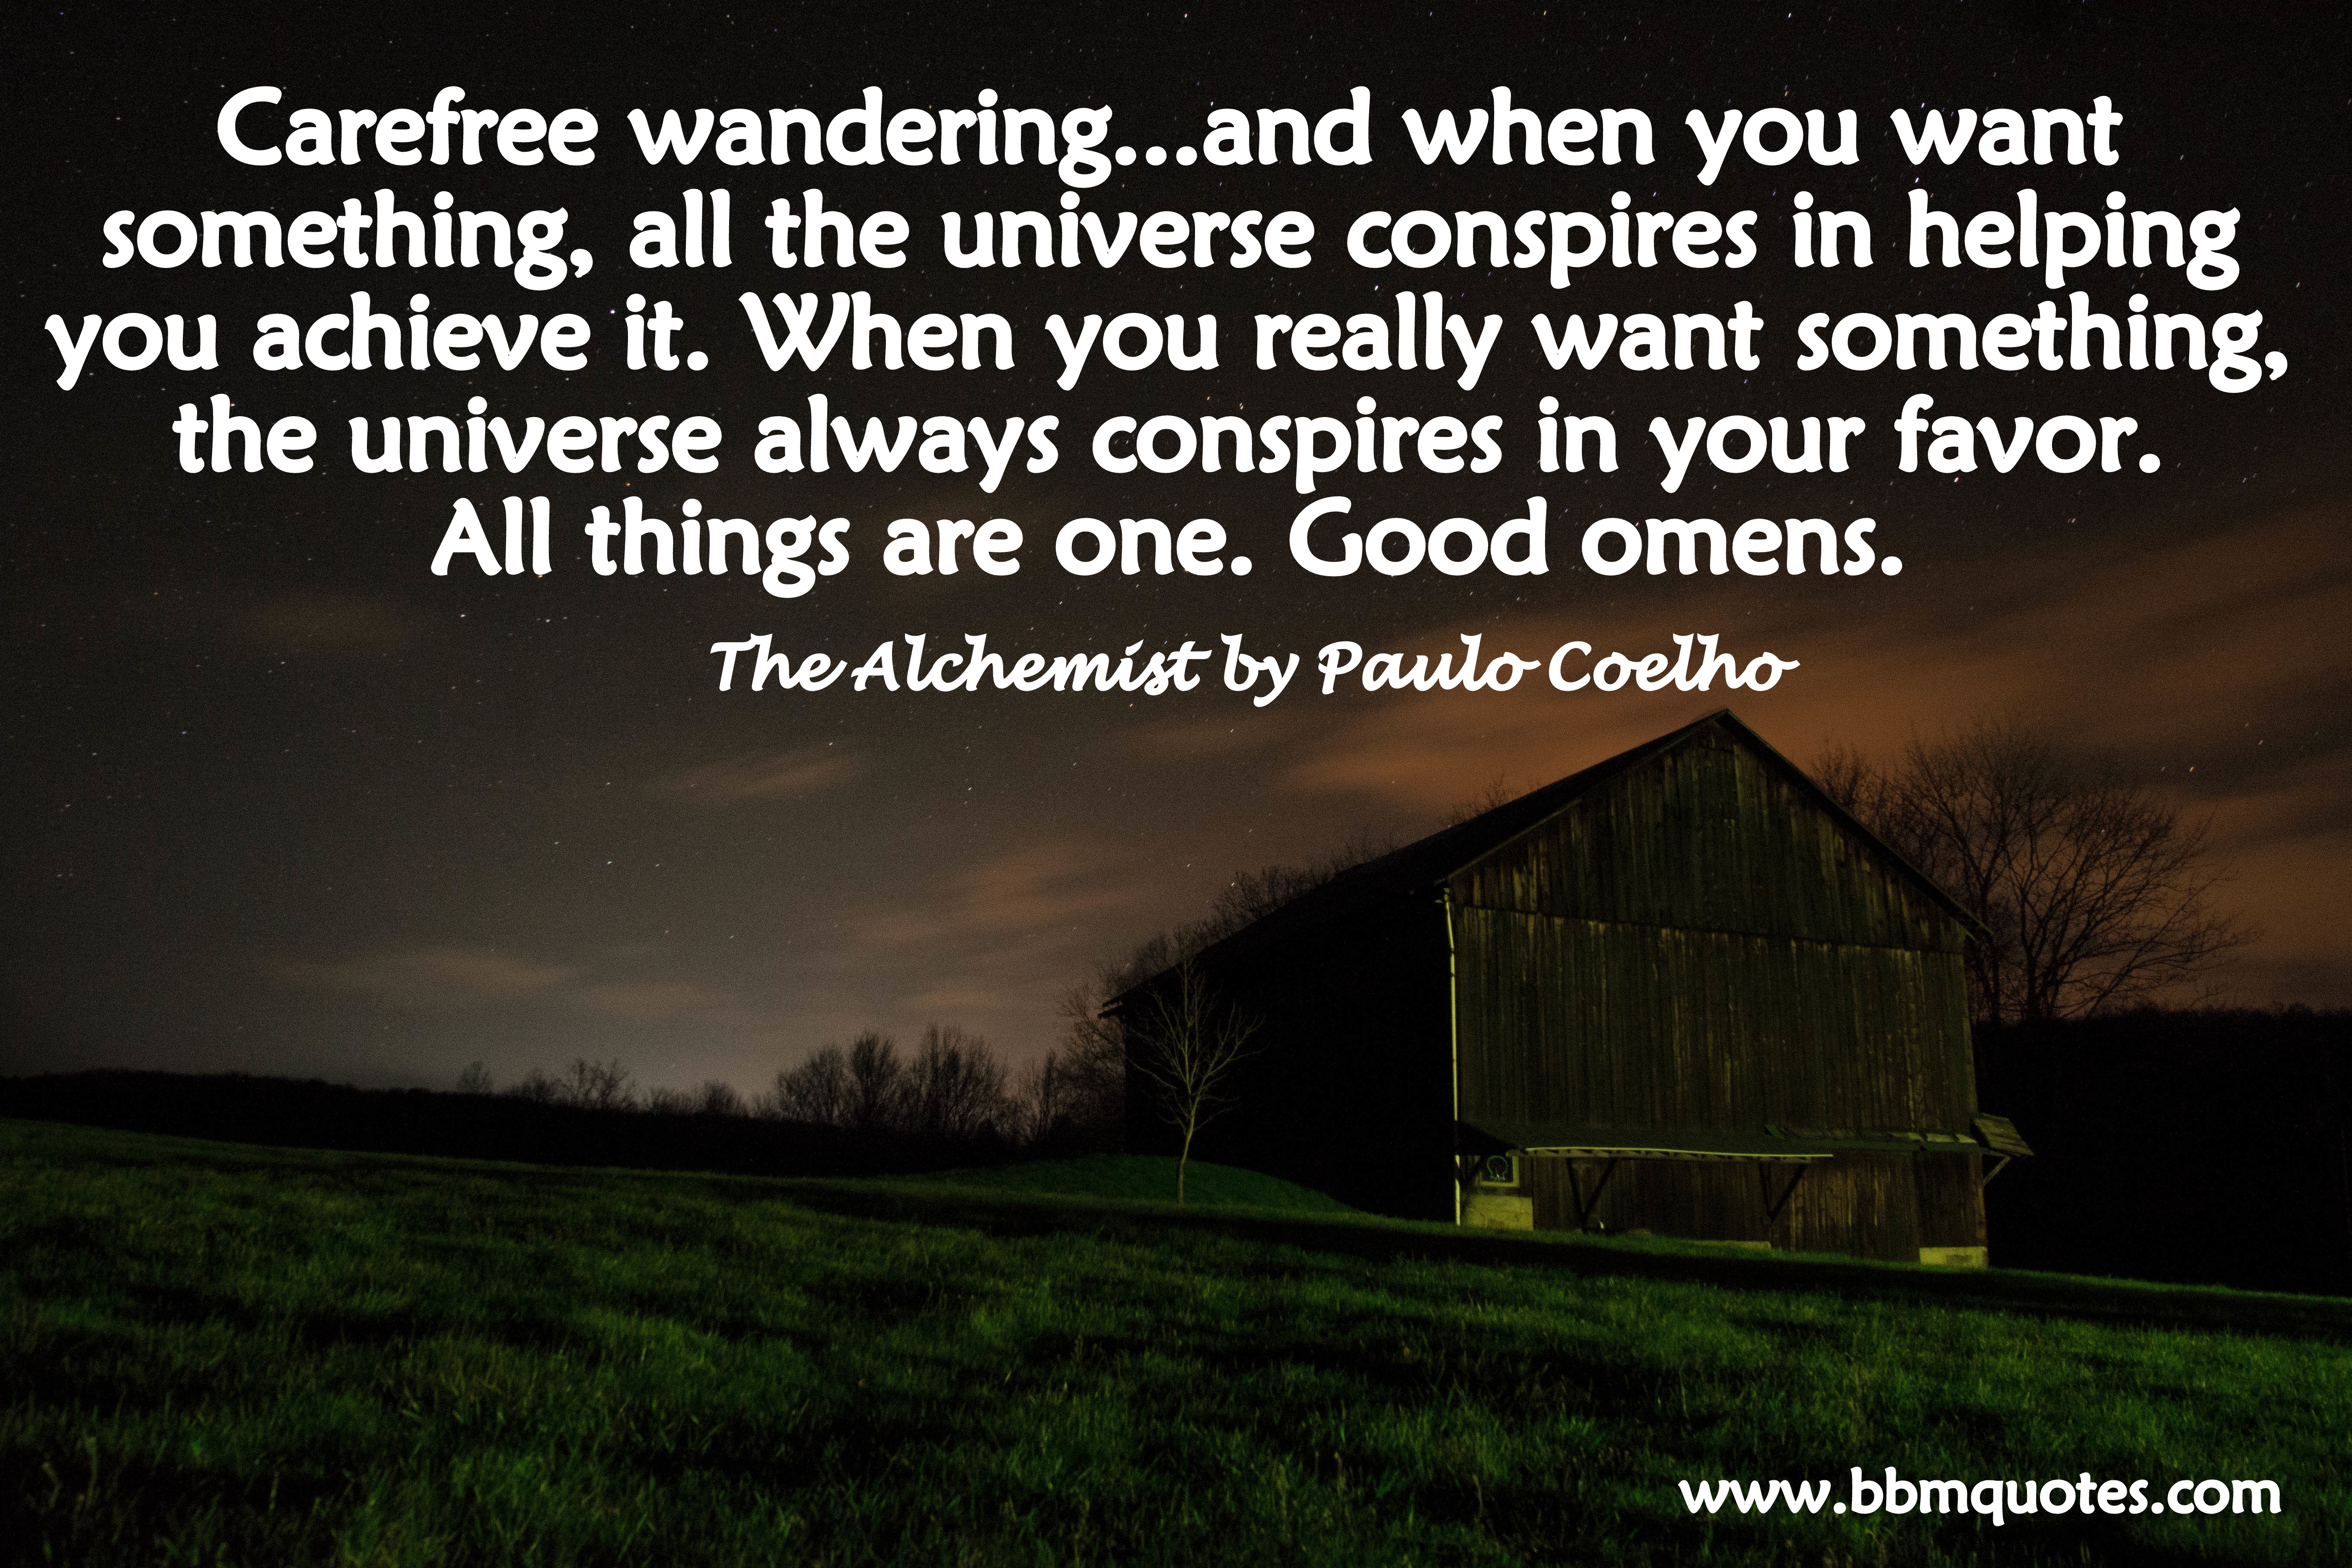 Quote from The Alchemist by Paulo Coelho | All things are one., Grass, Night, Outdoor, Paulo, HQ Photo